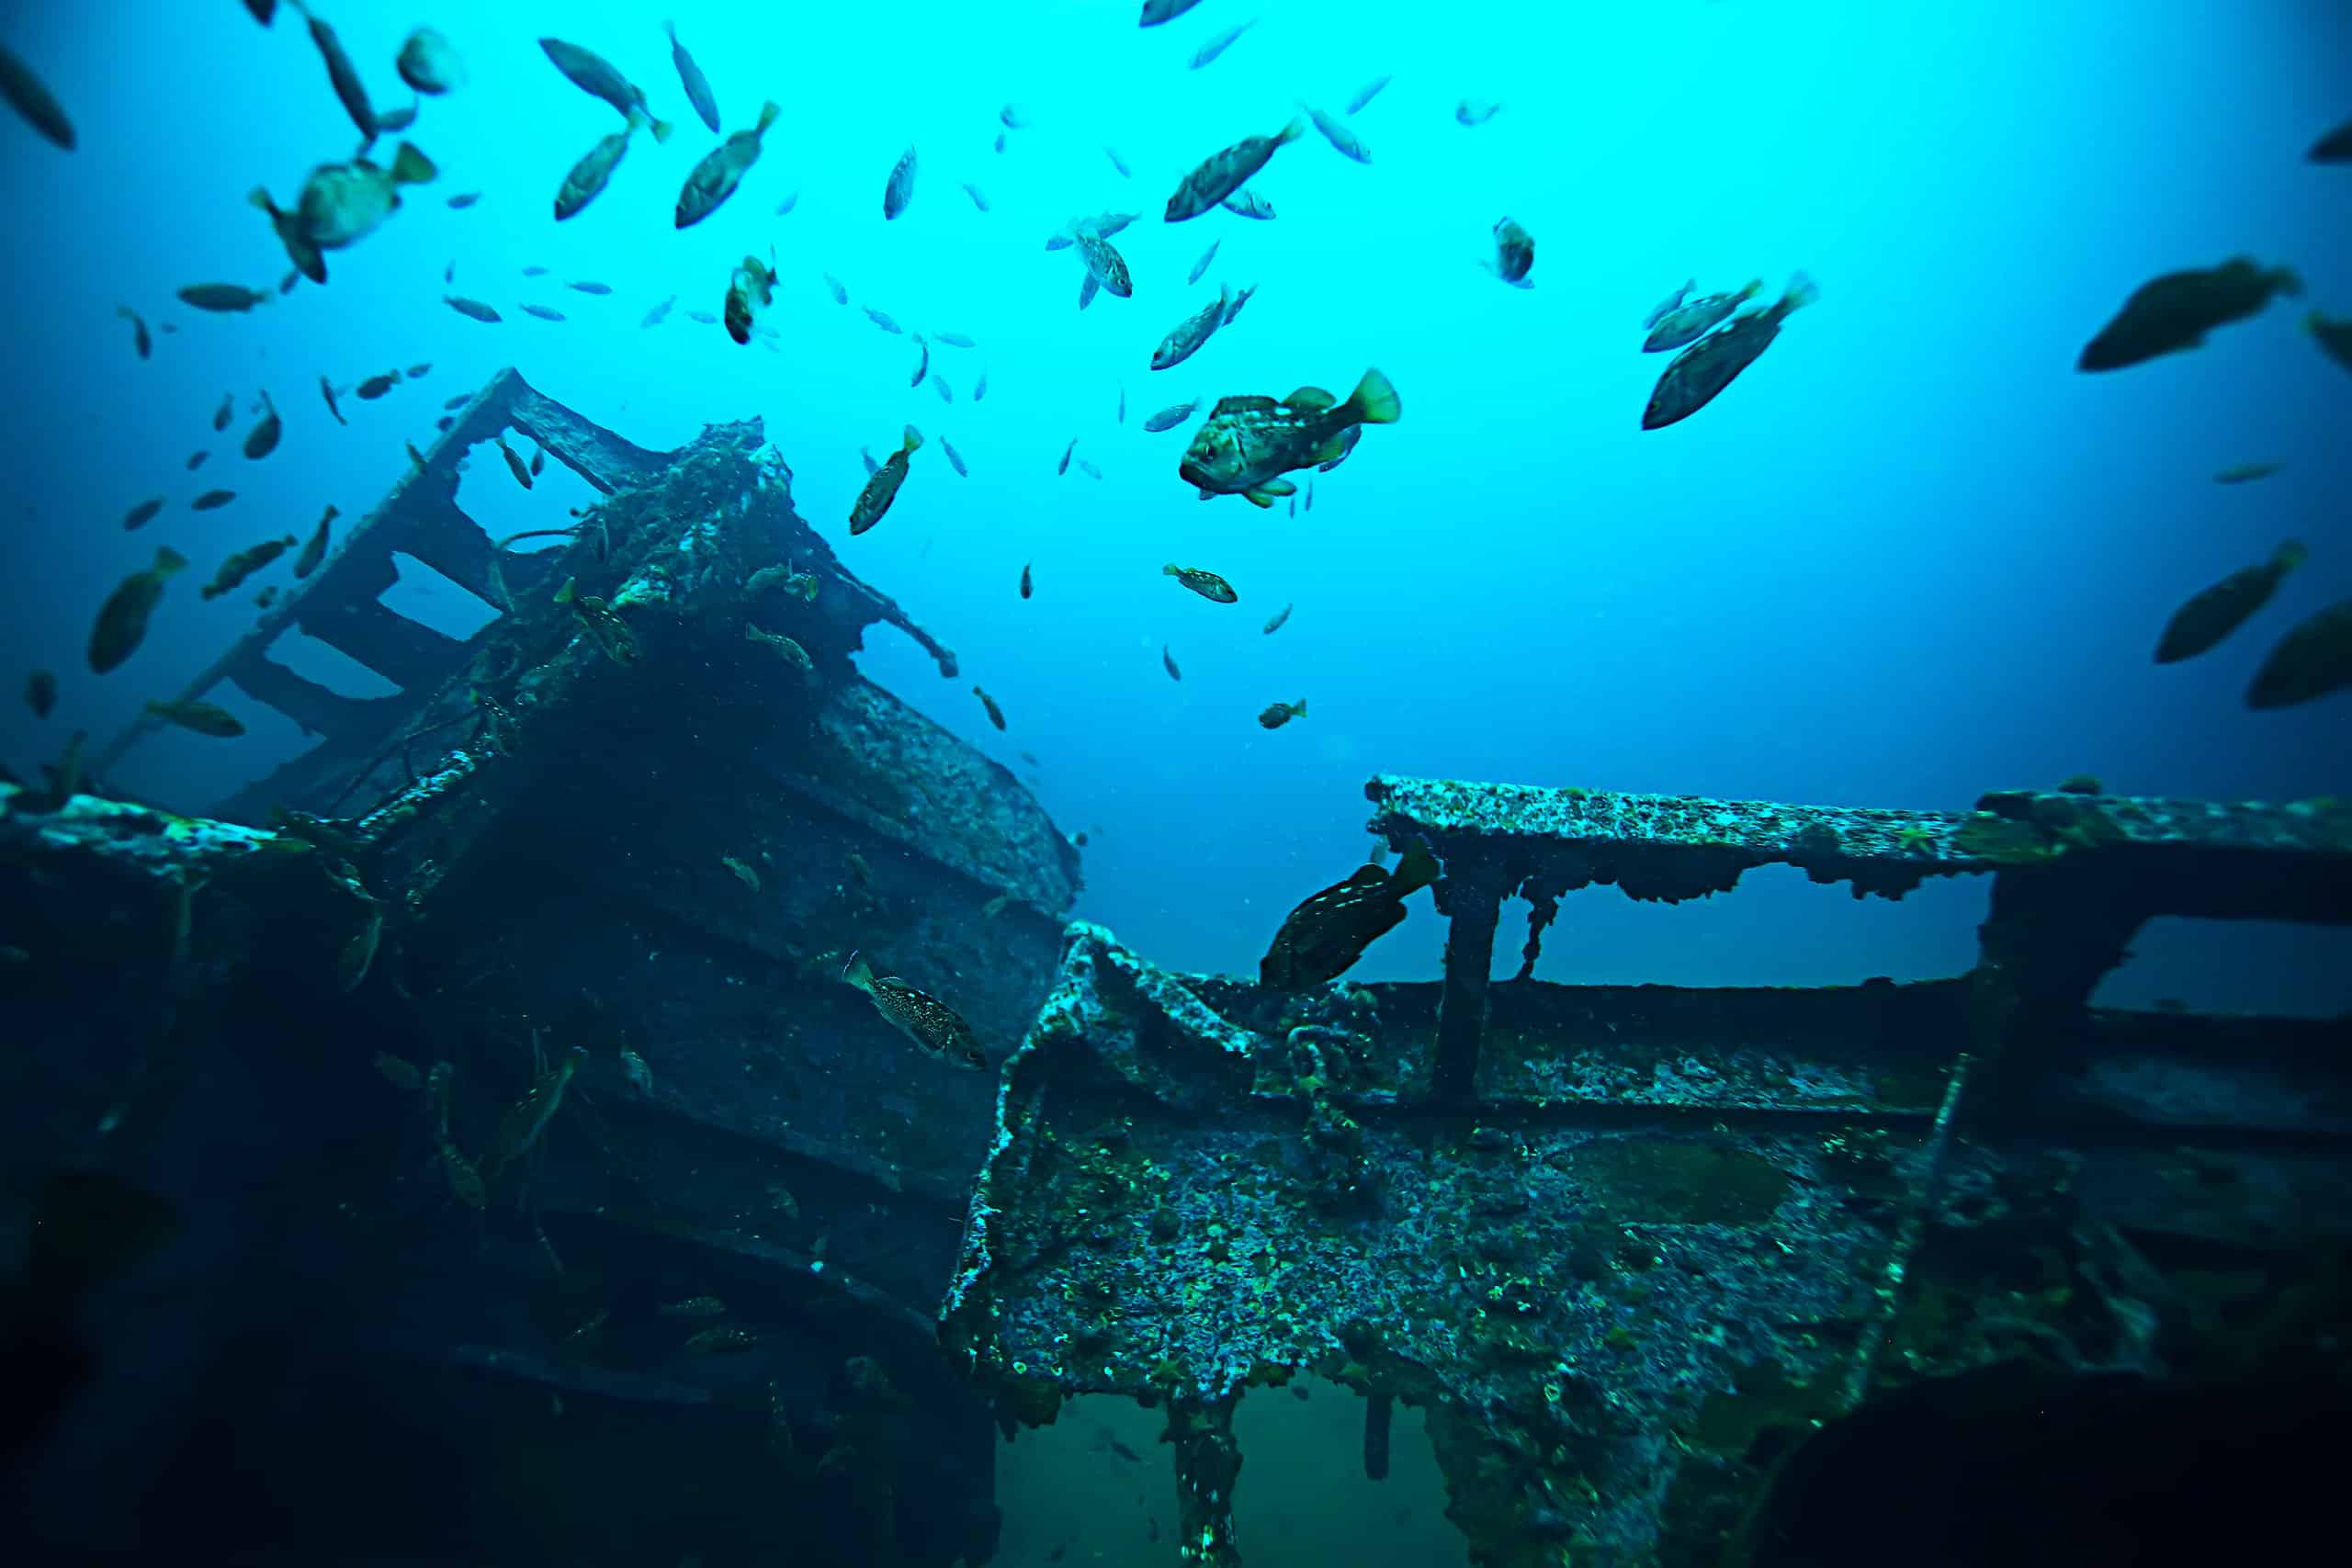 Close up of underwater shipwreck and the fish that call it home